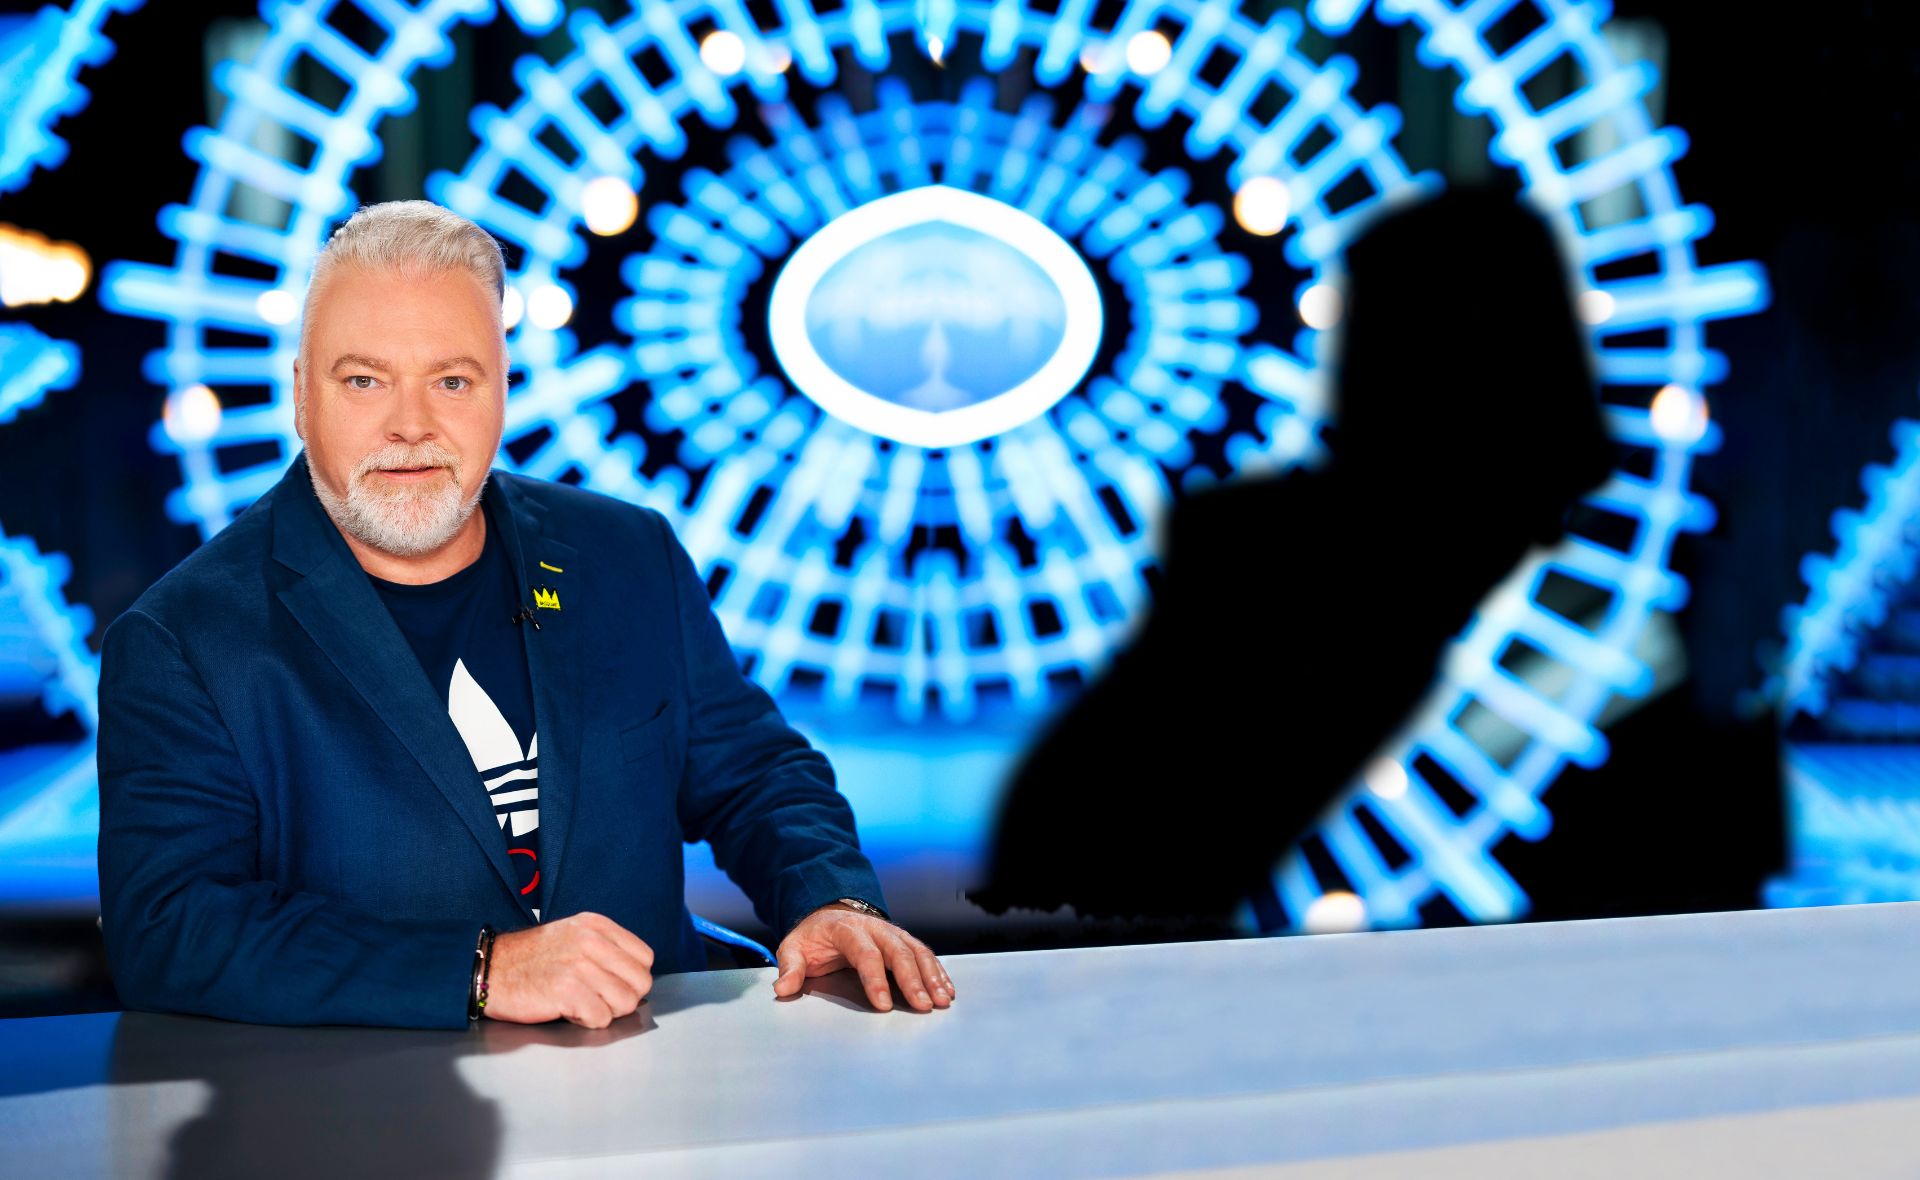 How becoming a father has made Australian Idol’s Kyle Sandilands more “empathetic”